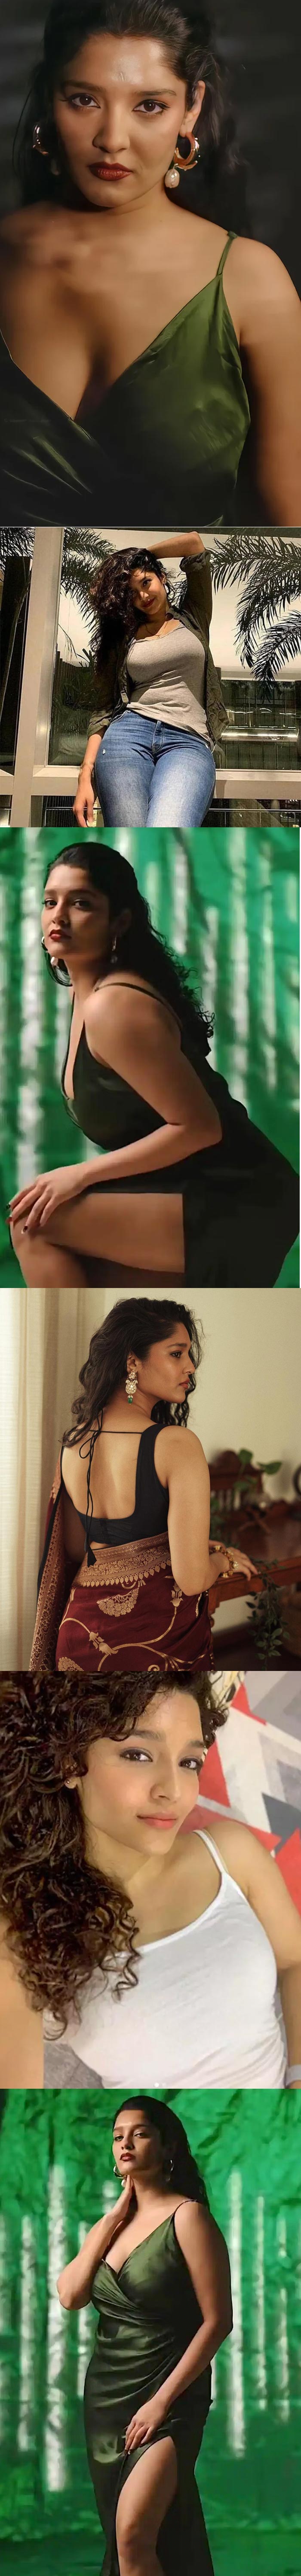 Ritika Hot Brazzers Videos - Sexy! These pictures of Ritika Singh are too hot to handle